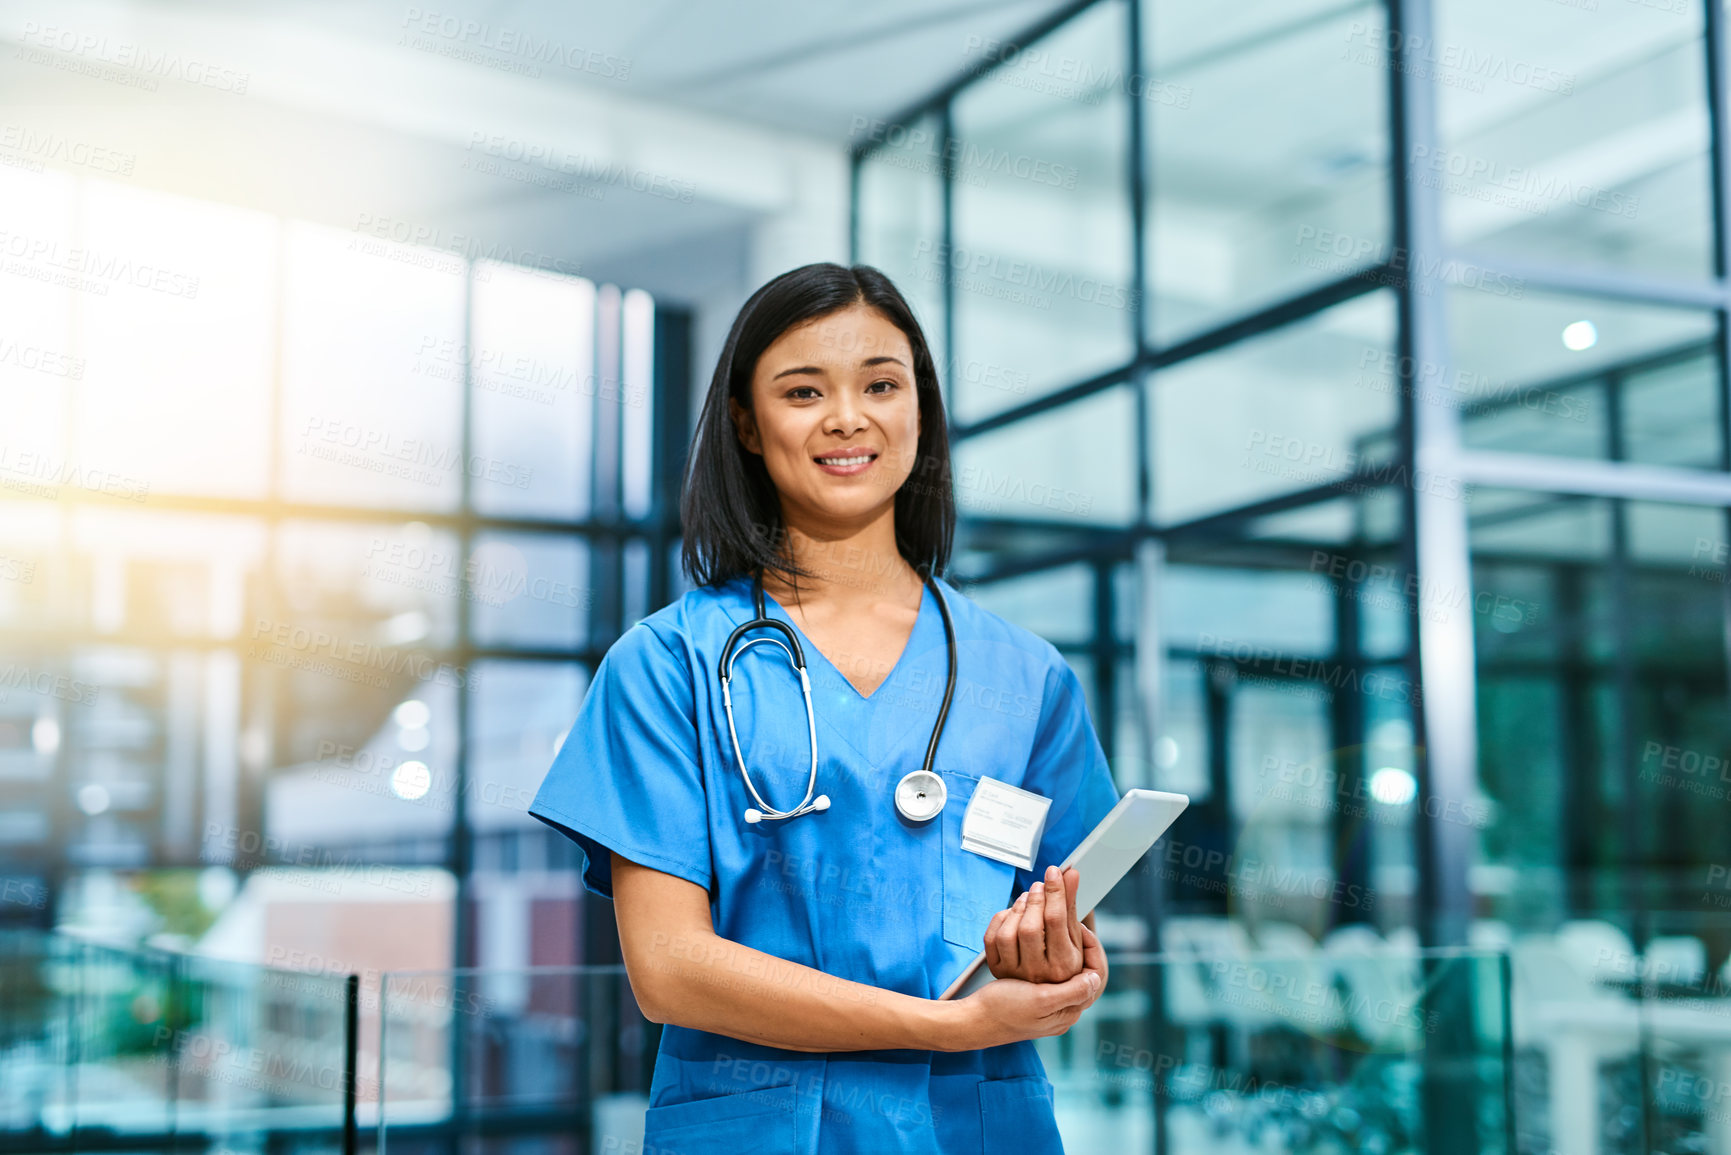 Buy stock photo Health care, confidence and woman, portrait of nurse or doctor with tablet in hospital for support in medical work. Healthcare career, wellness and medicine, confident nursing professional with smile